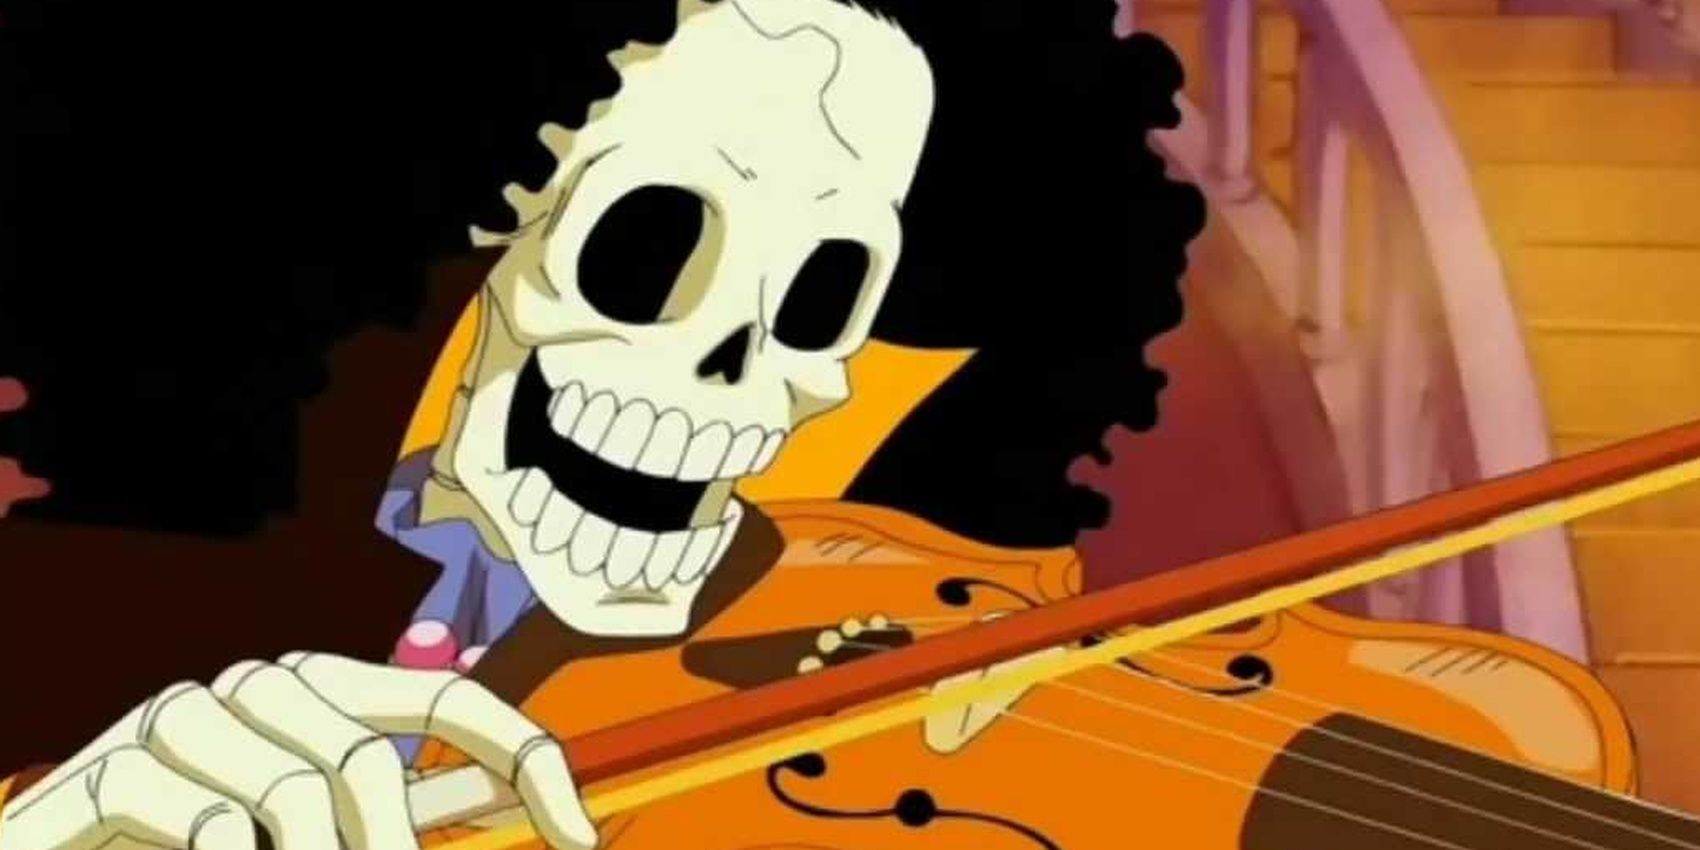 brook playing on a violin in one piece